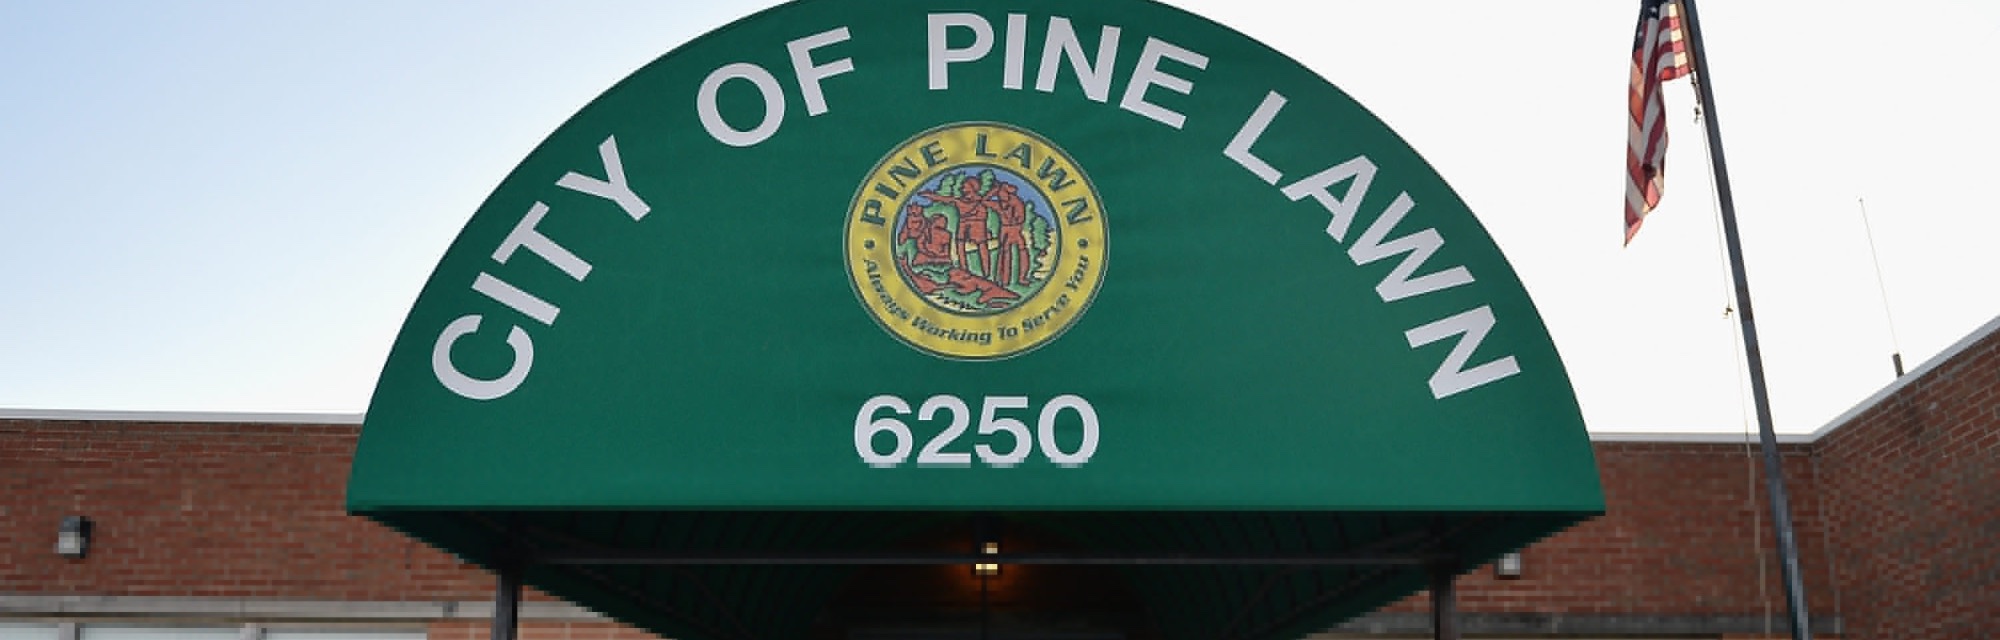 City Information – The City of Pine Lawn, Missouri